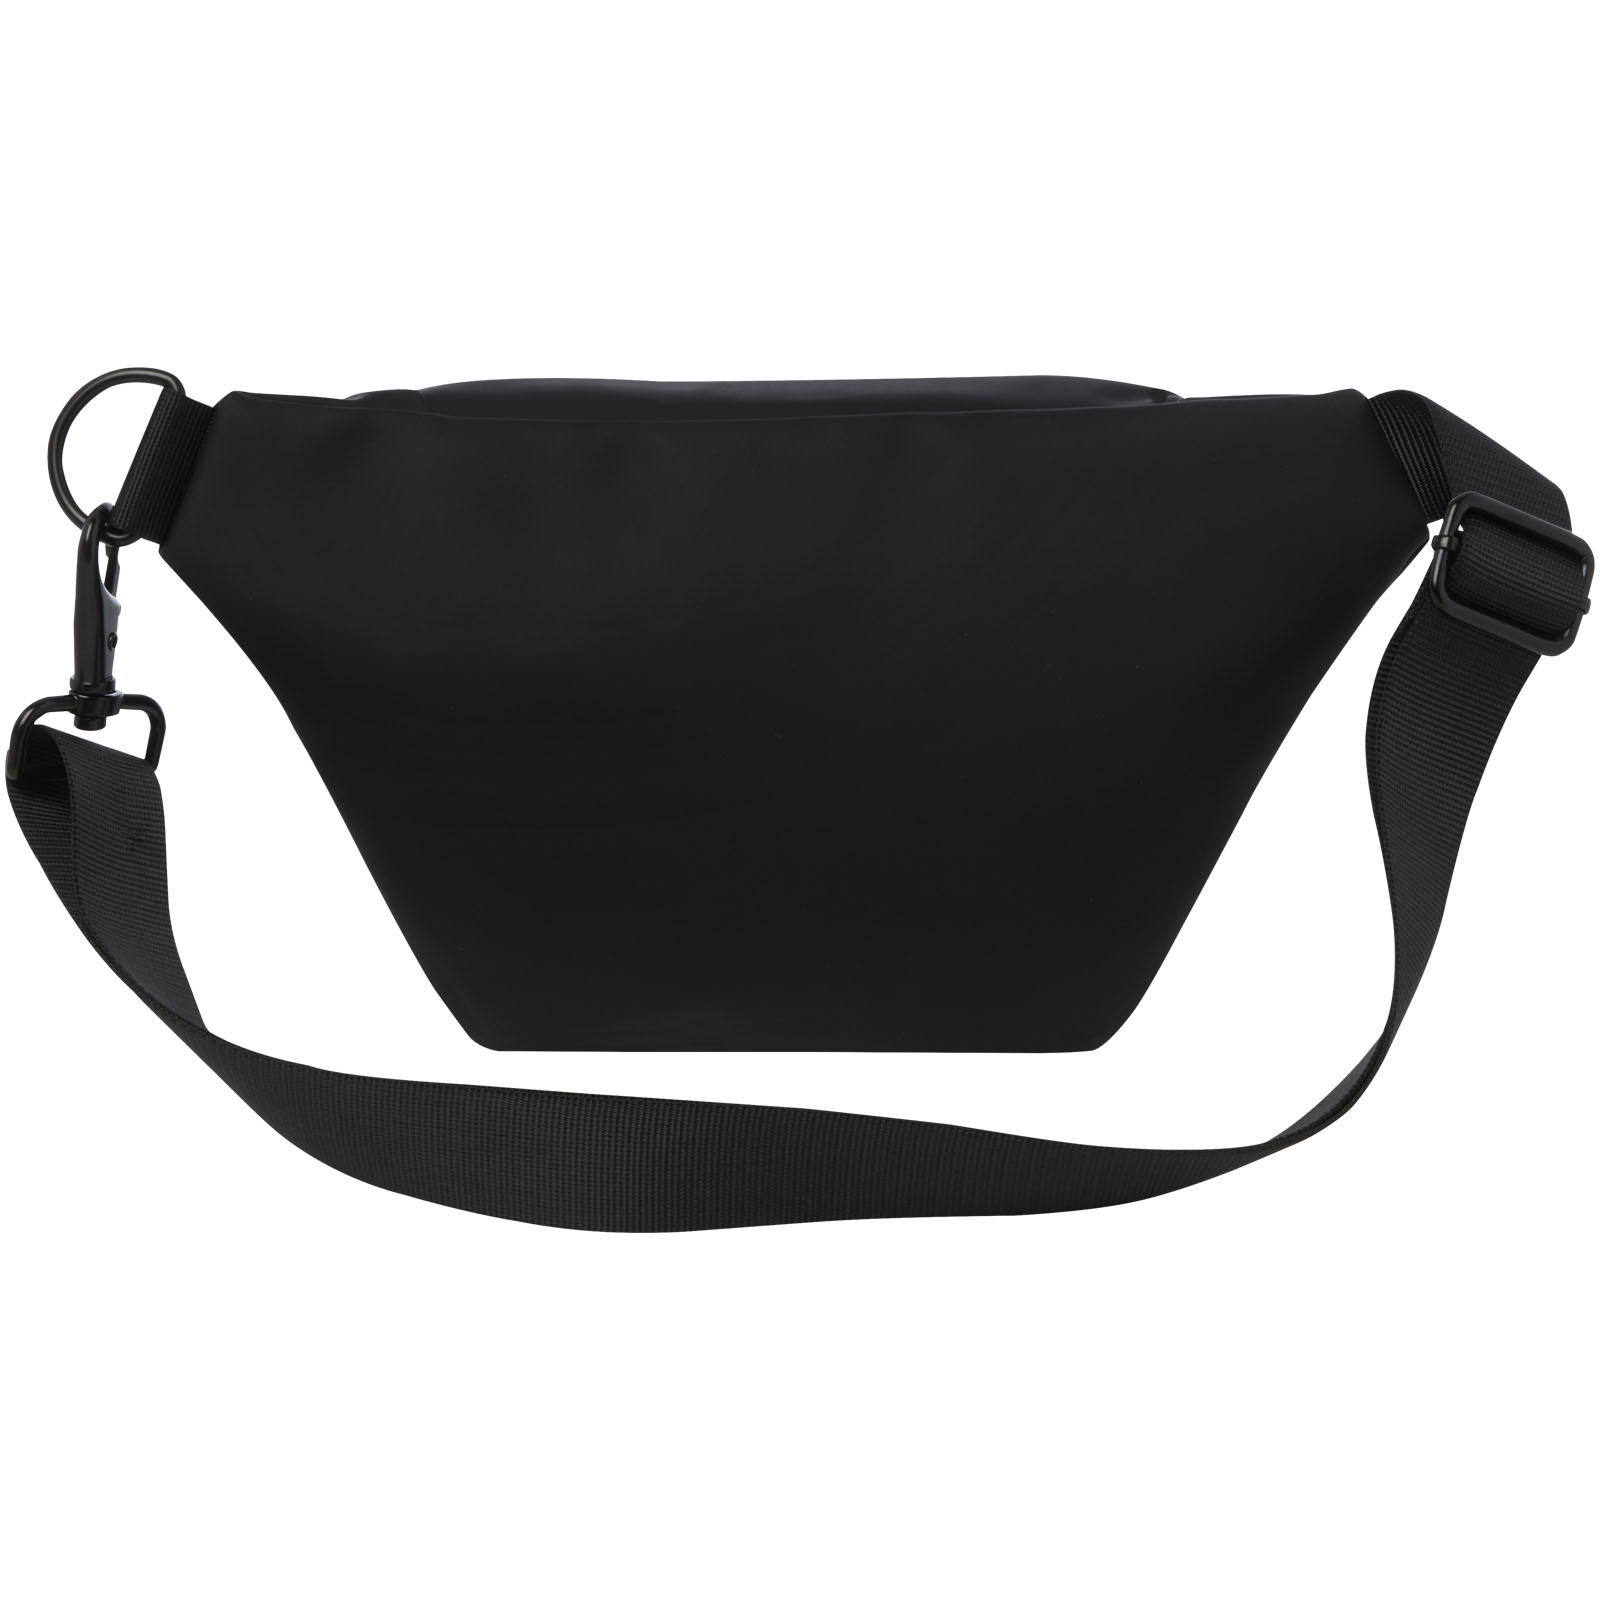 Advertising Travel Accessories - Turner fanny pack - 2